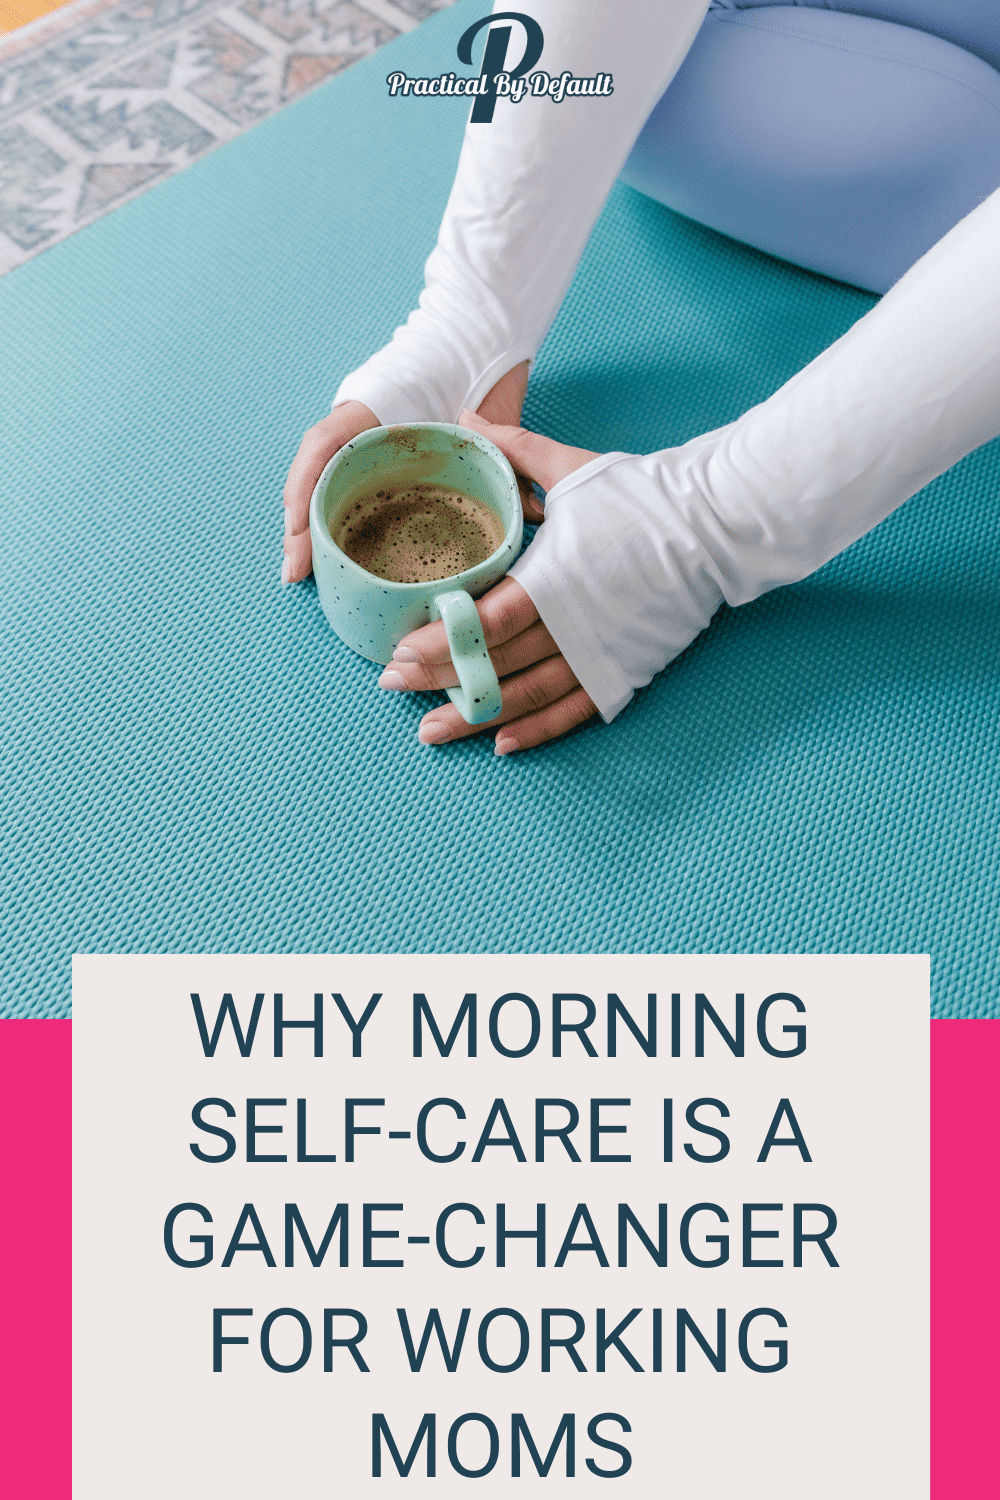 A woman's hands holding a cup of coffee while seated on a yoga mat, highlighting 'Why Morning Self-Care is a Game-Changer for Working Moms' with a website link below.